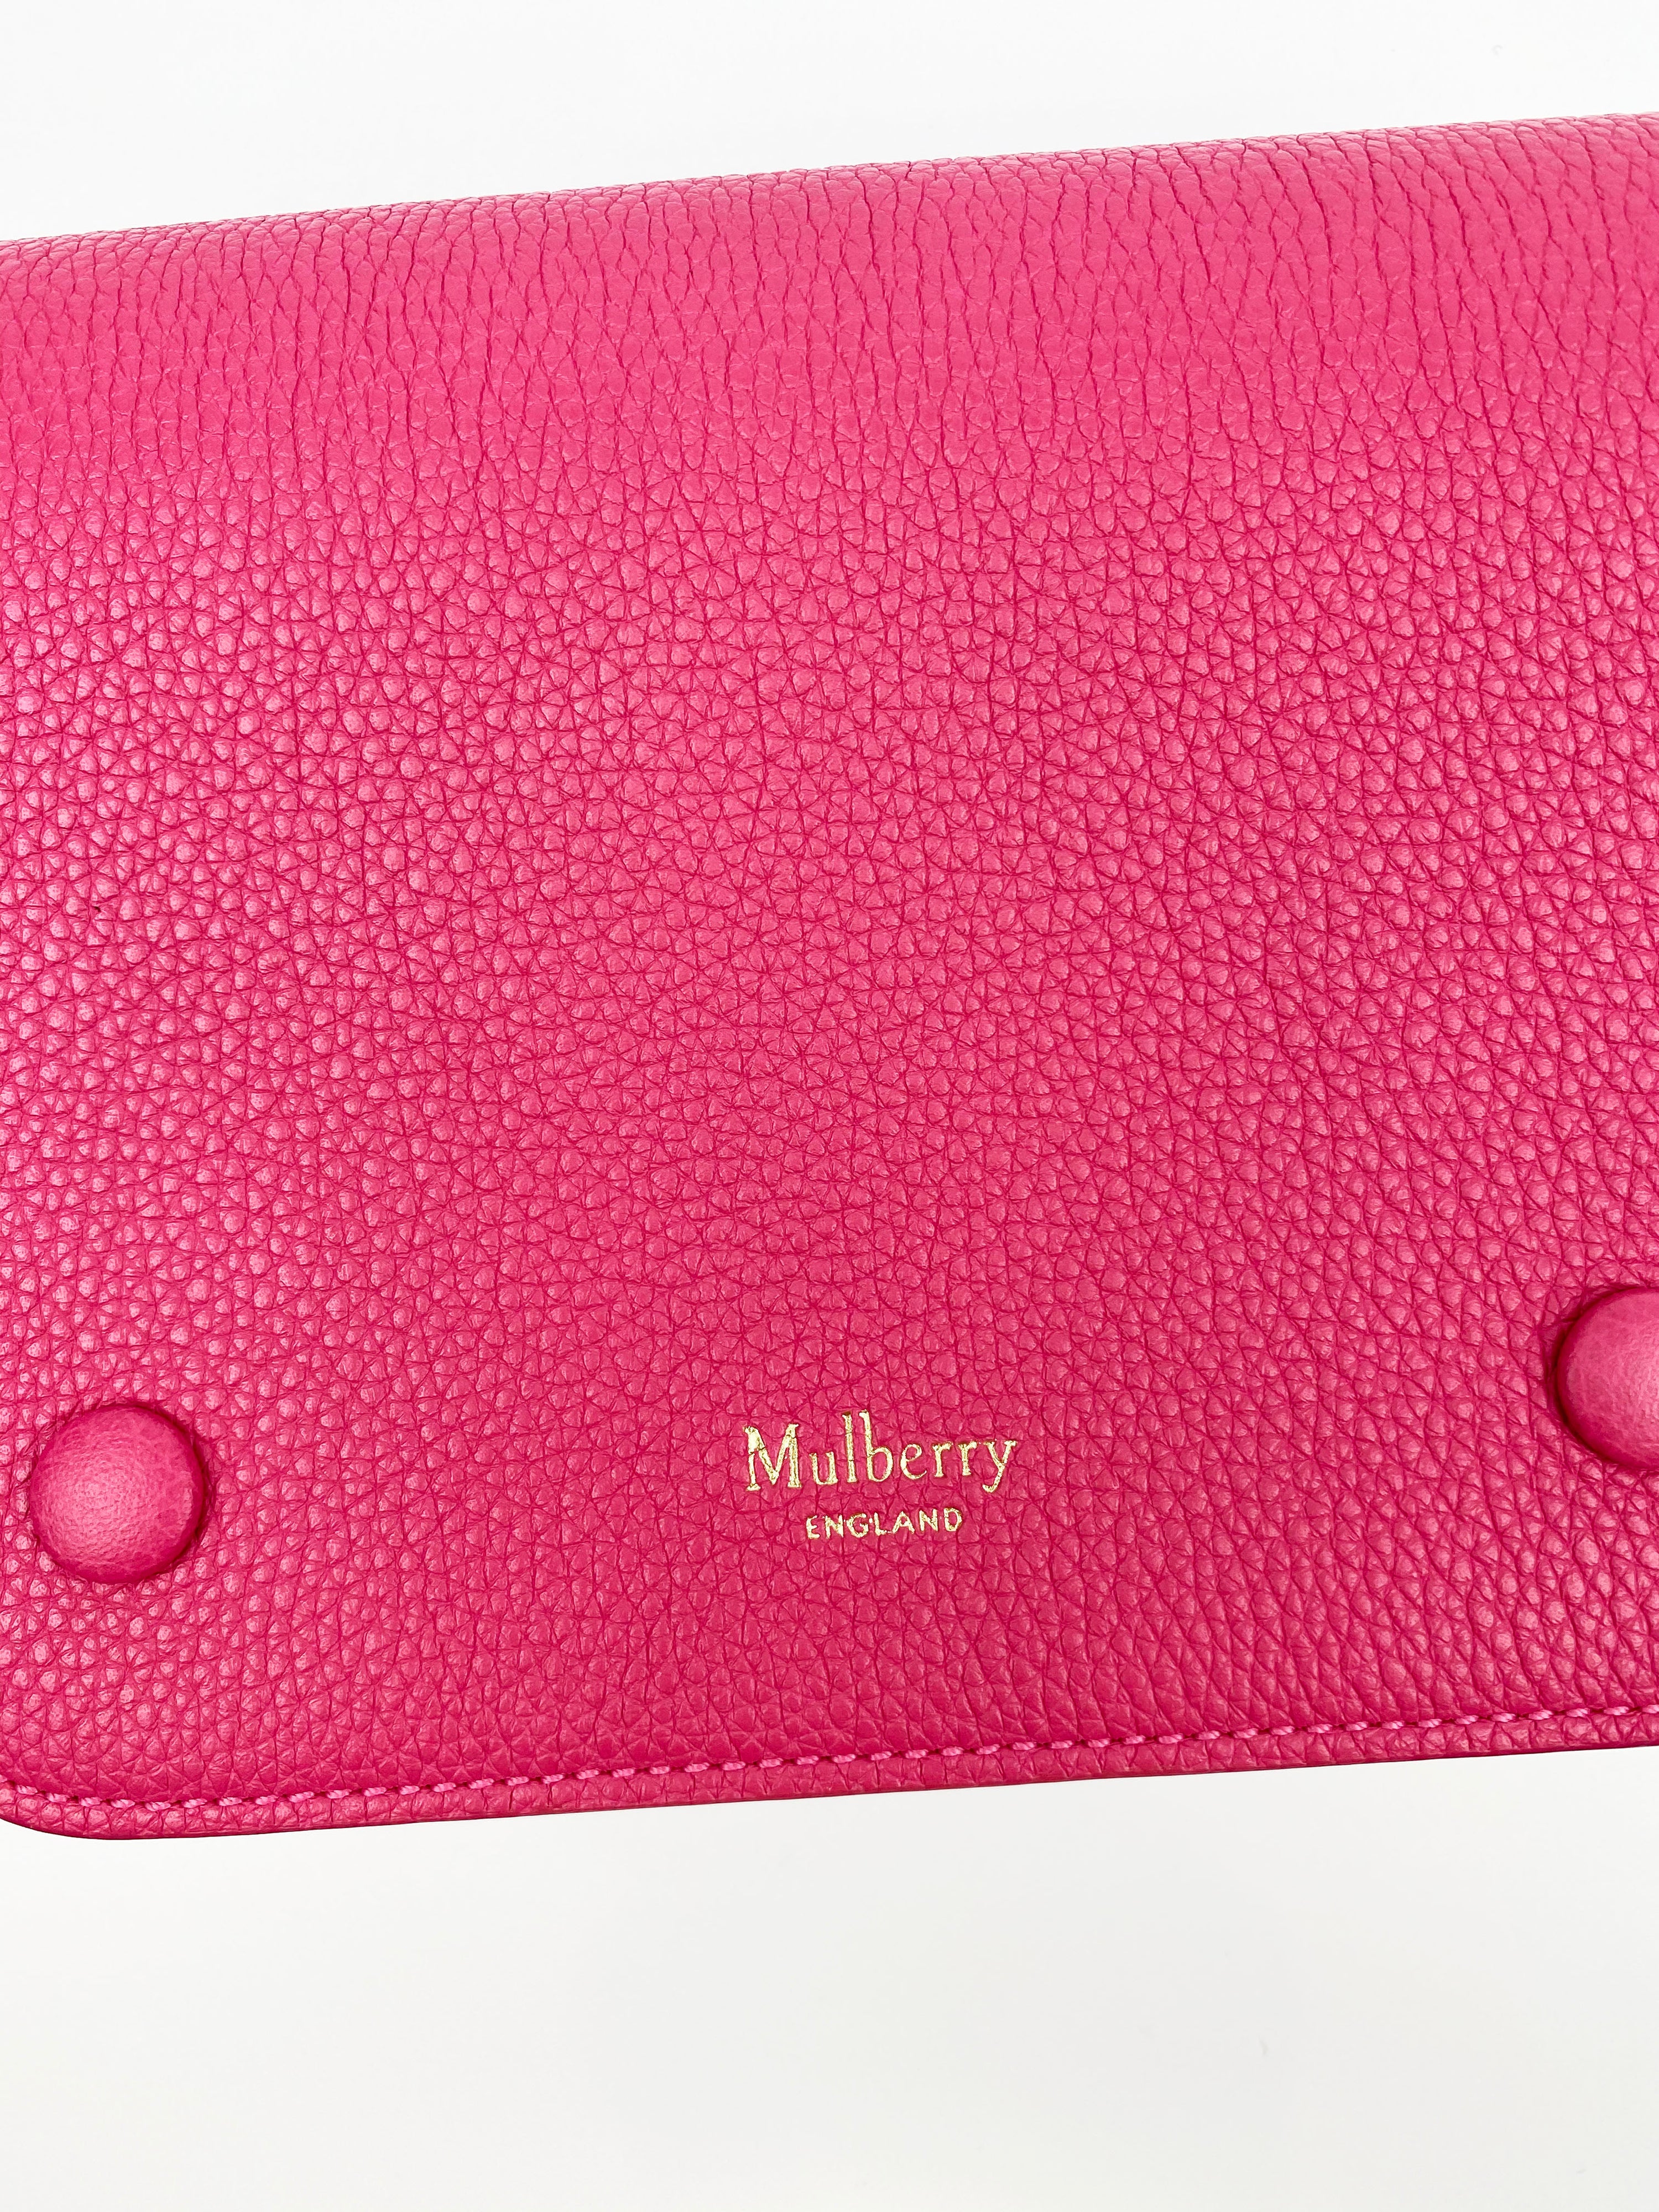 Mulberry Chain Clutch